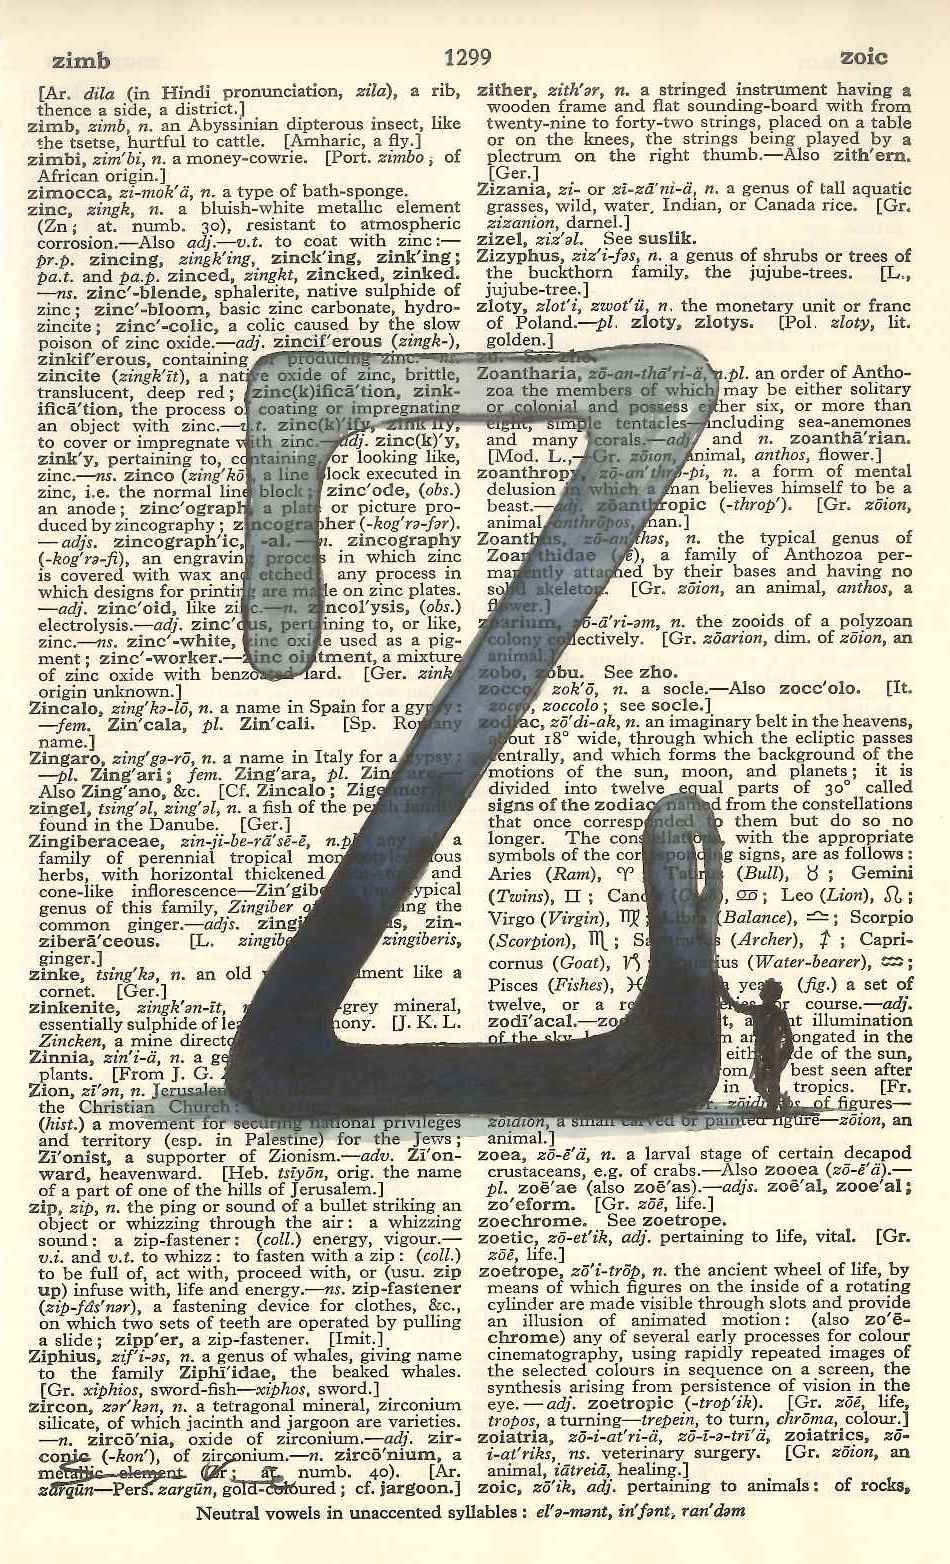 PRINT Z on dictionary